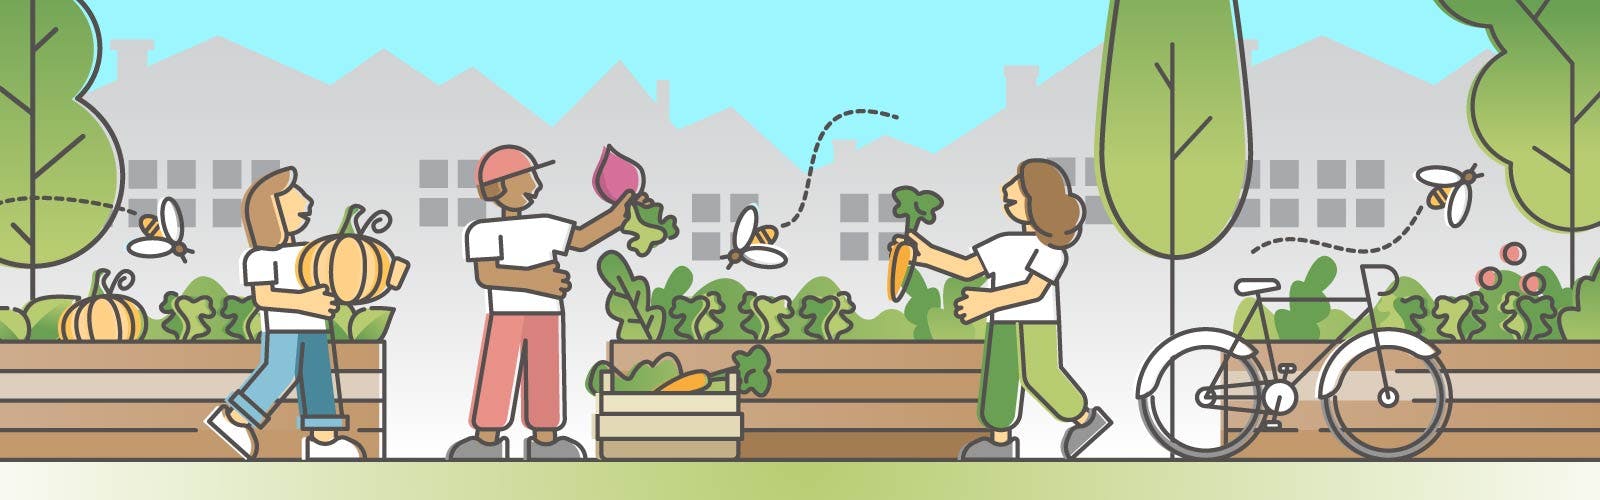 Illustrated image of people in a garden.